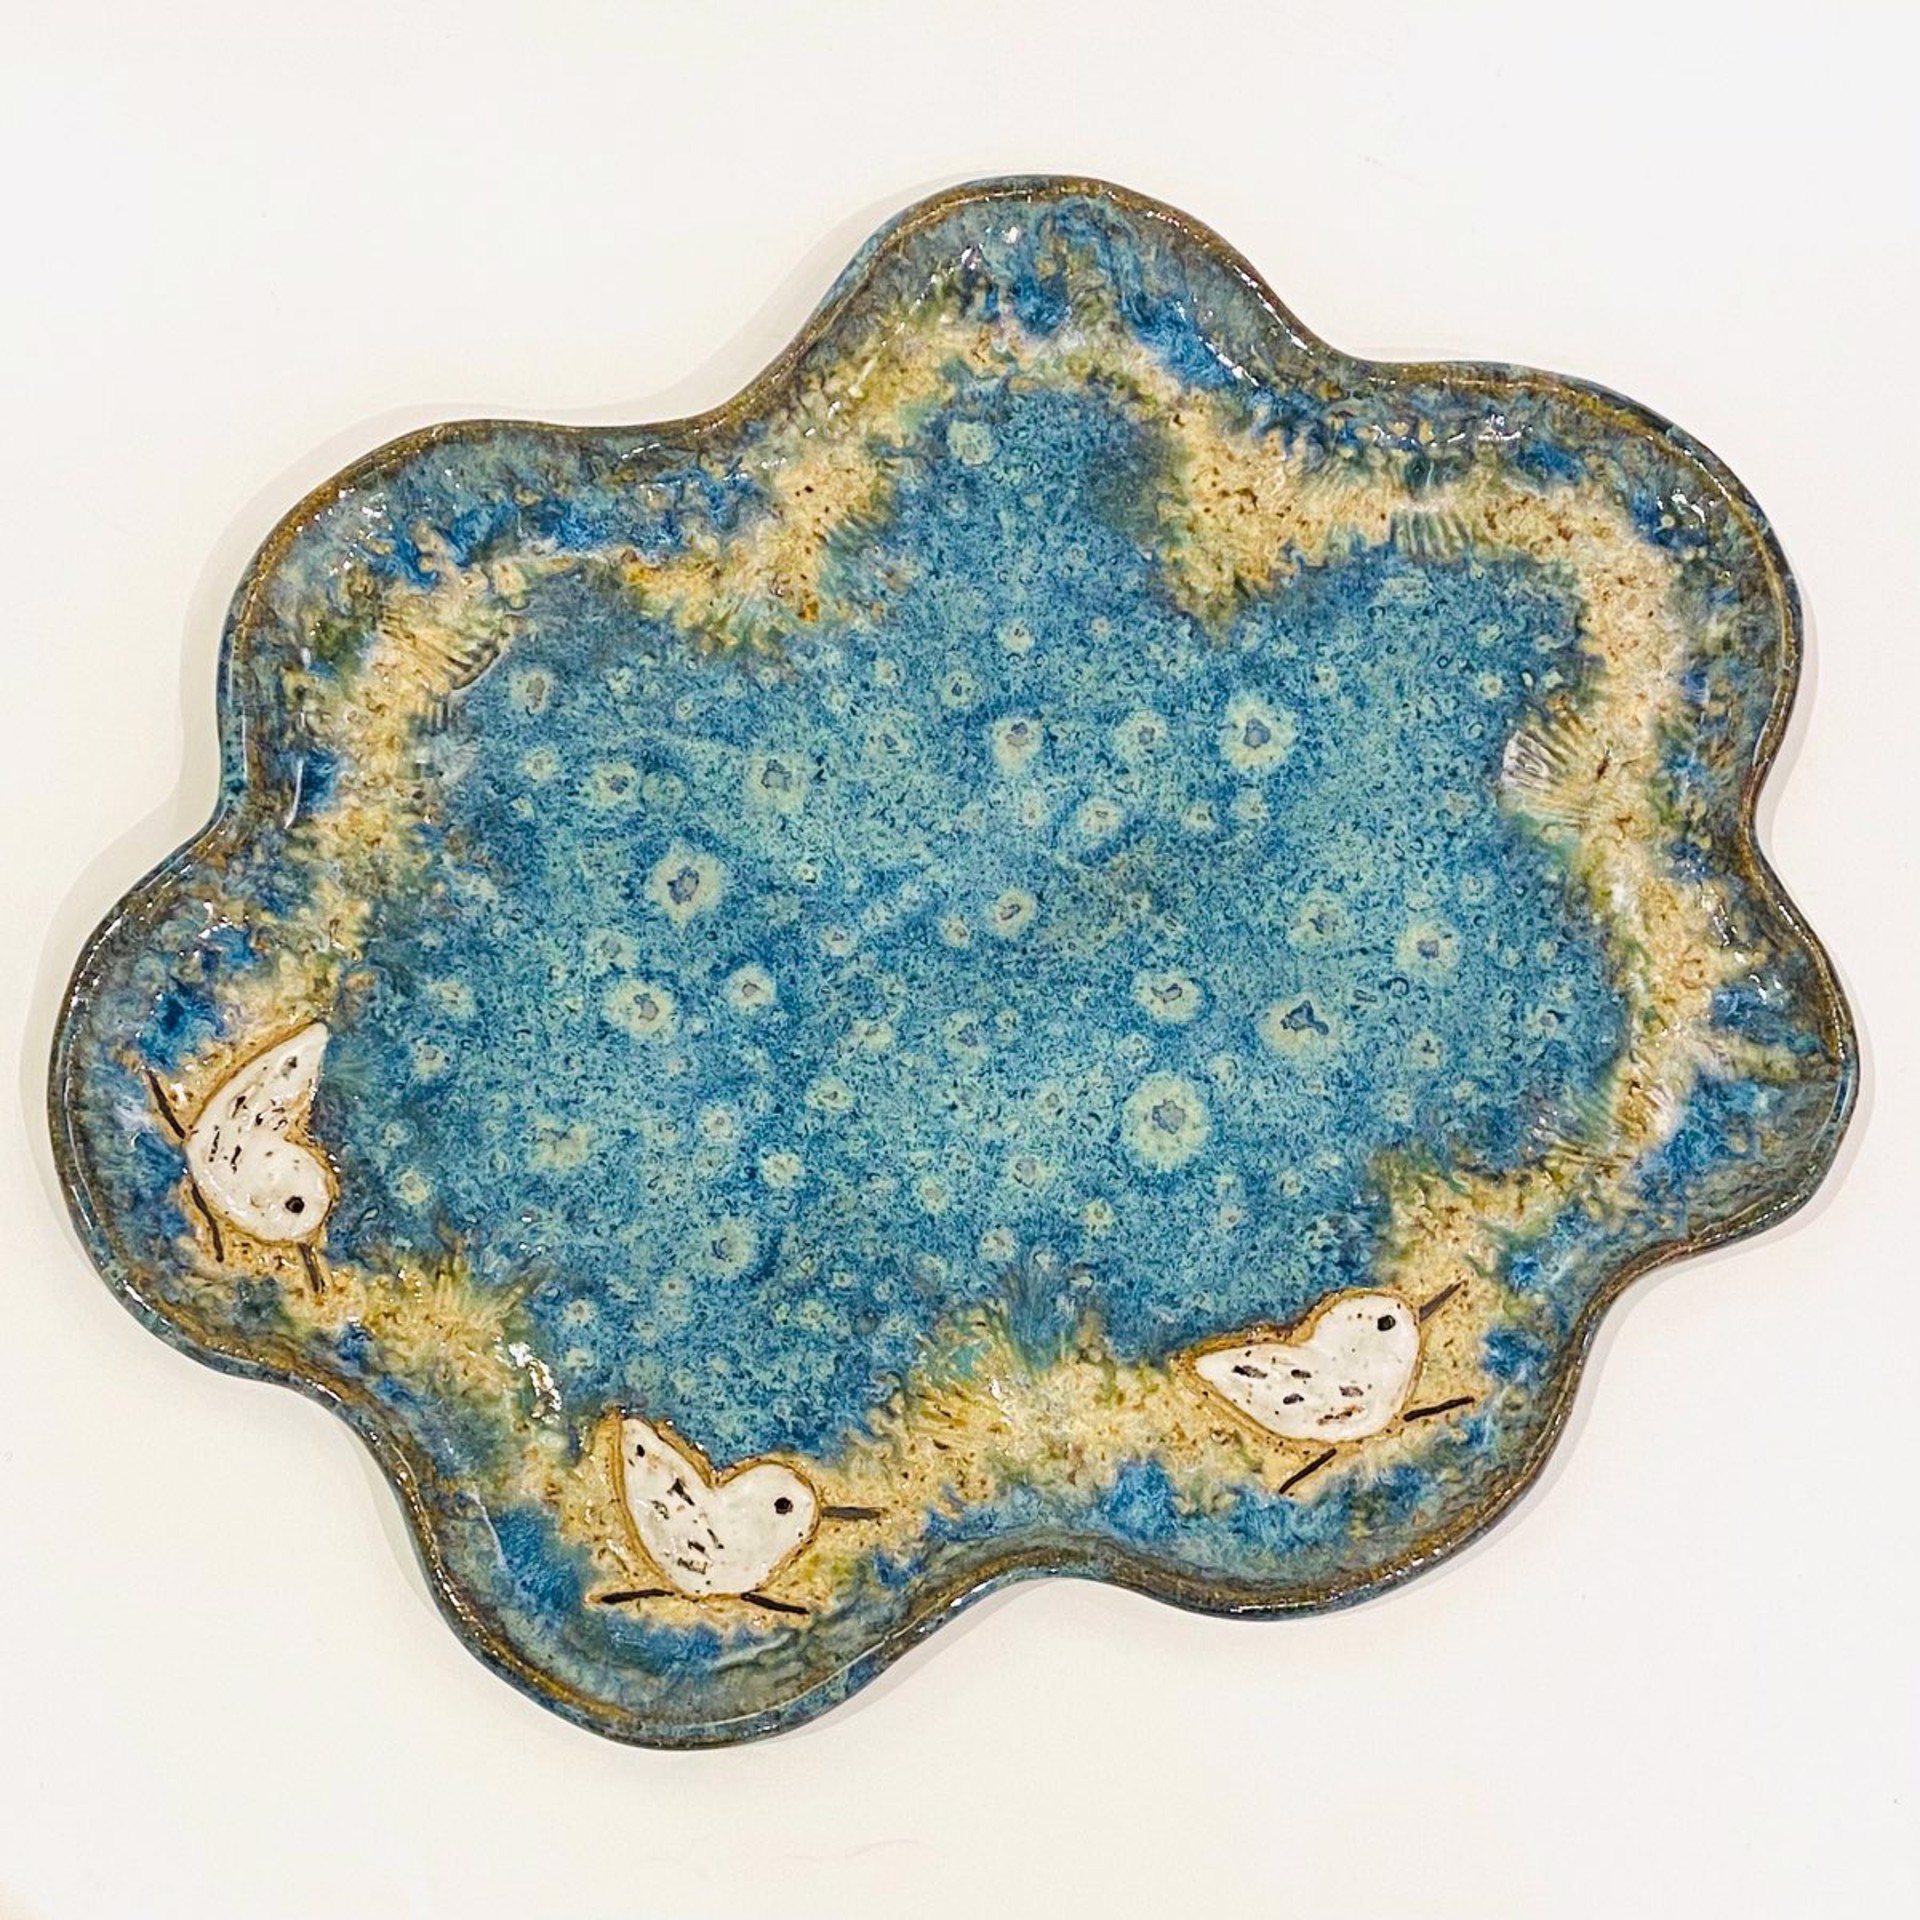 LG22-921 Plate with Three Sandpipers (Blue Glaze) by Jim & Steffi Logan